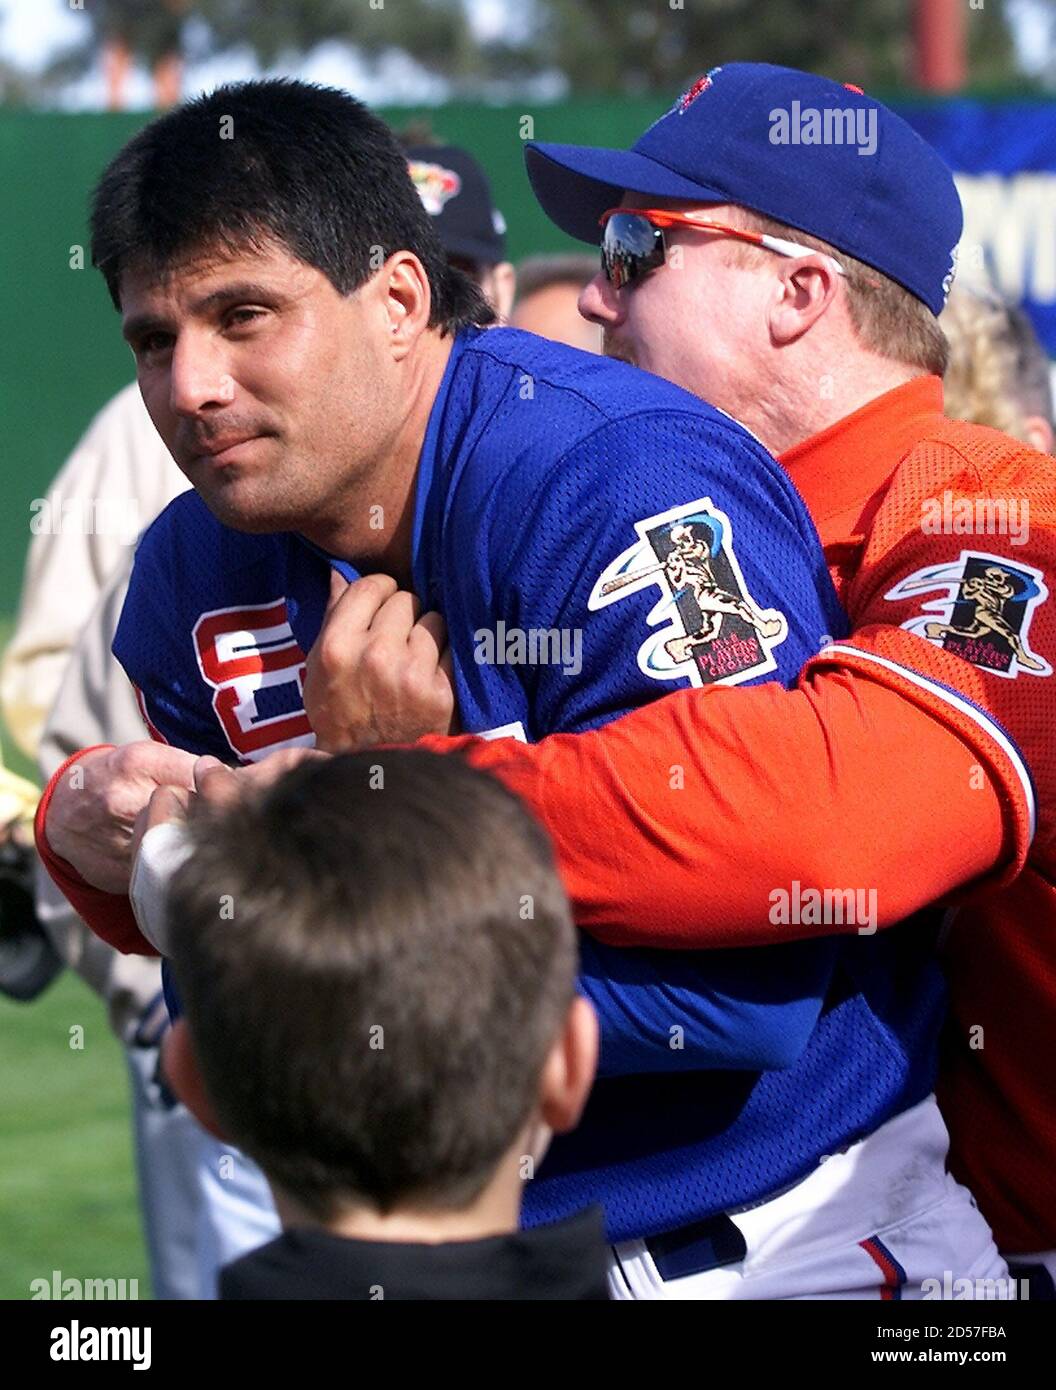 LAV06D:SPORT-BASEBALL:LAS VEGAS,NEVADA,12FEB00 - Tampa Bay Devil Rays'  outfielder Jose Canseco (L) is caught in a playful bear hug by St. Louis  Cardinals first baseman Mark McGwire as the players enter the field